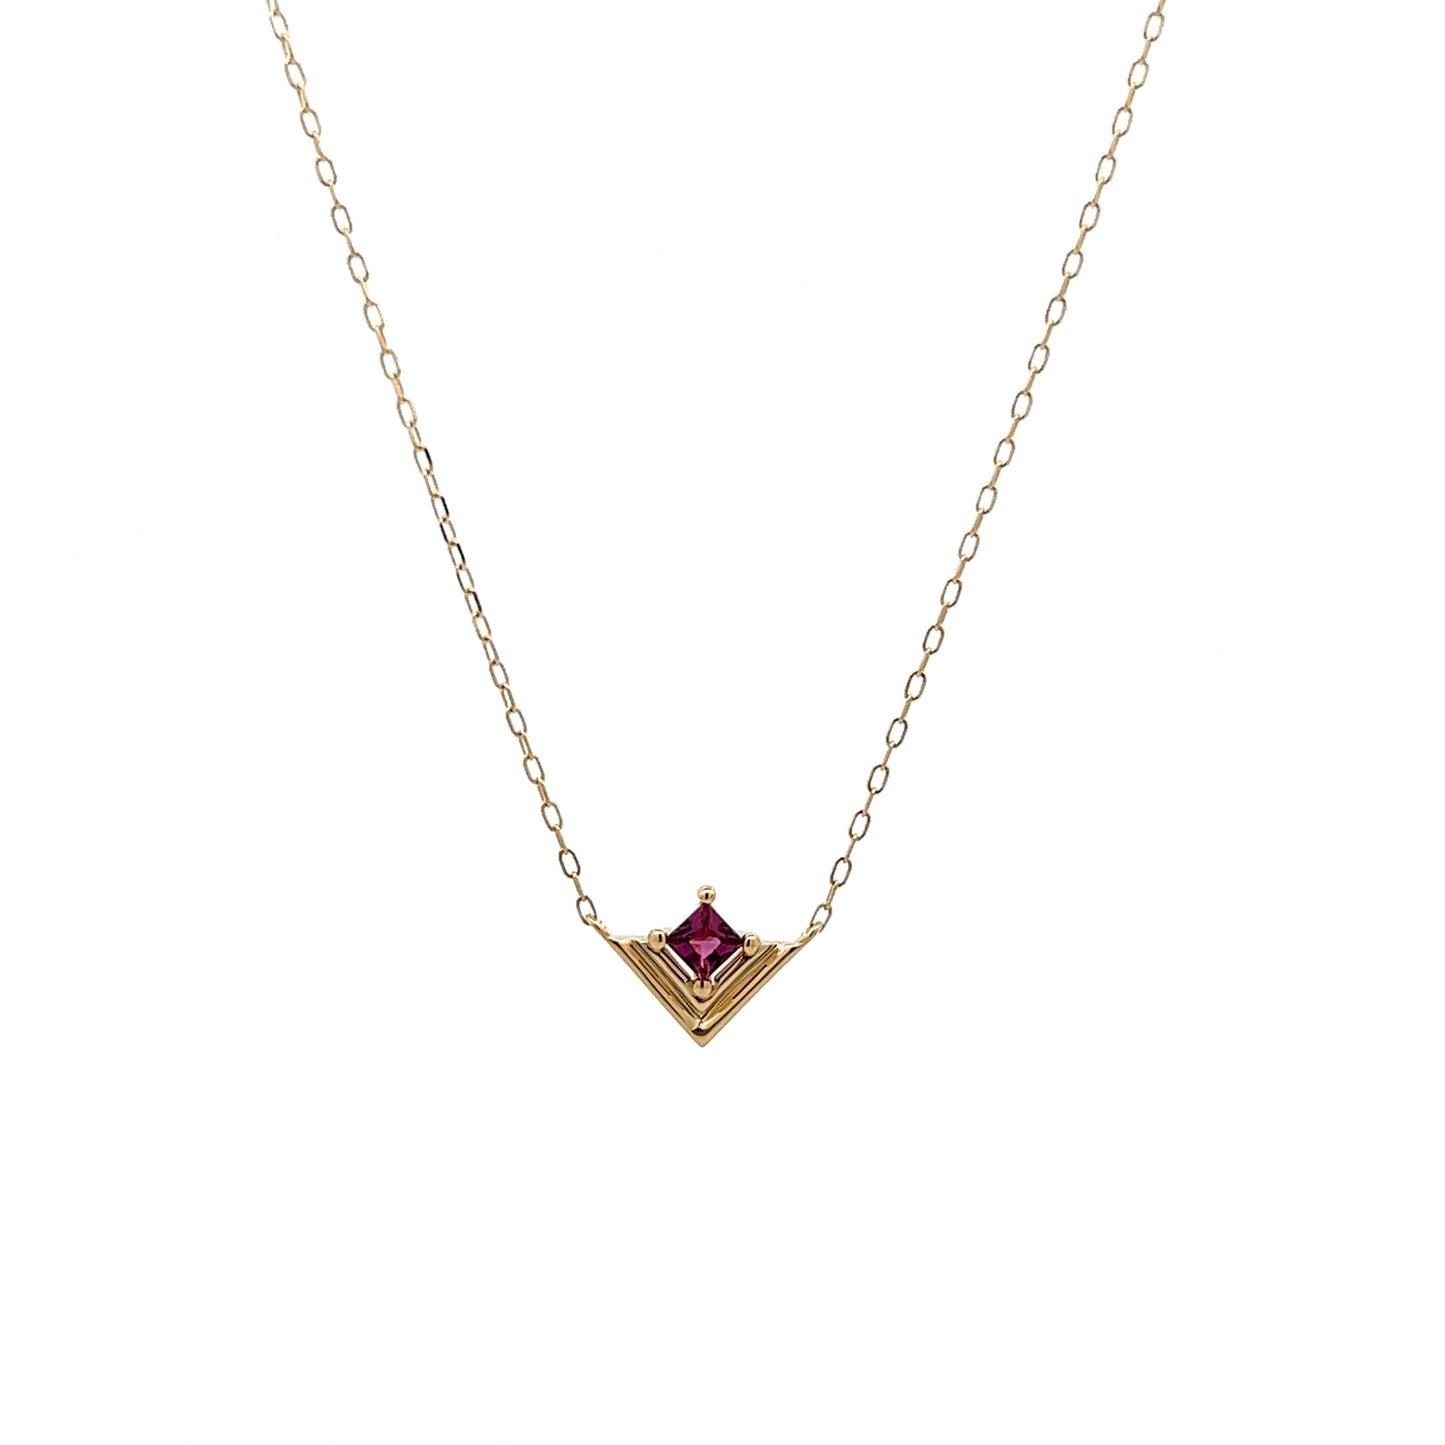 .19 Pink Tourmaline Pendant Necklace in Yellow Gold